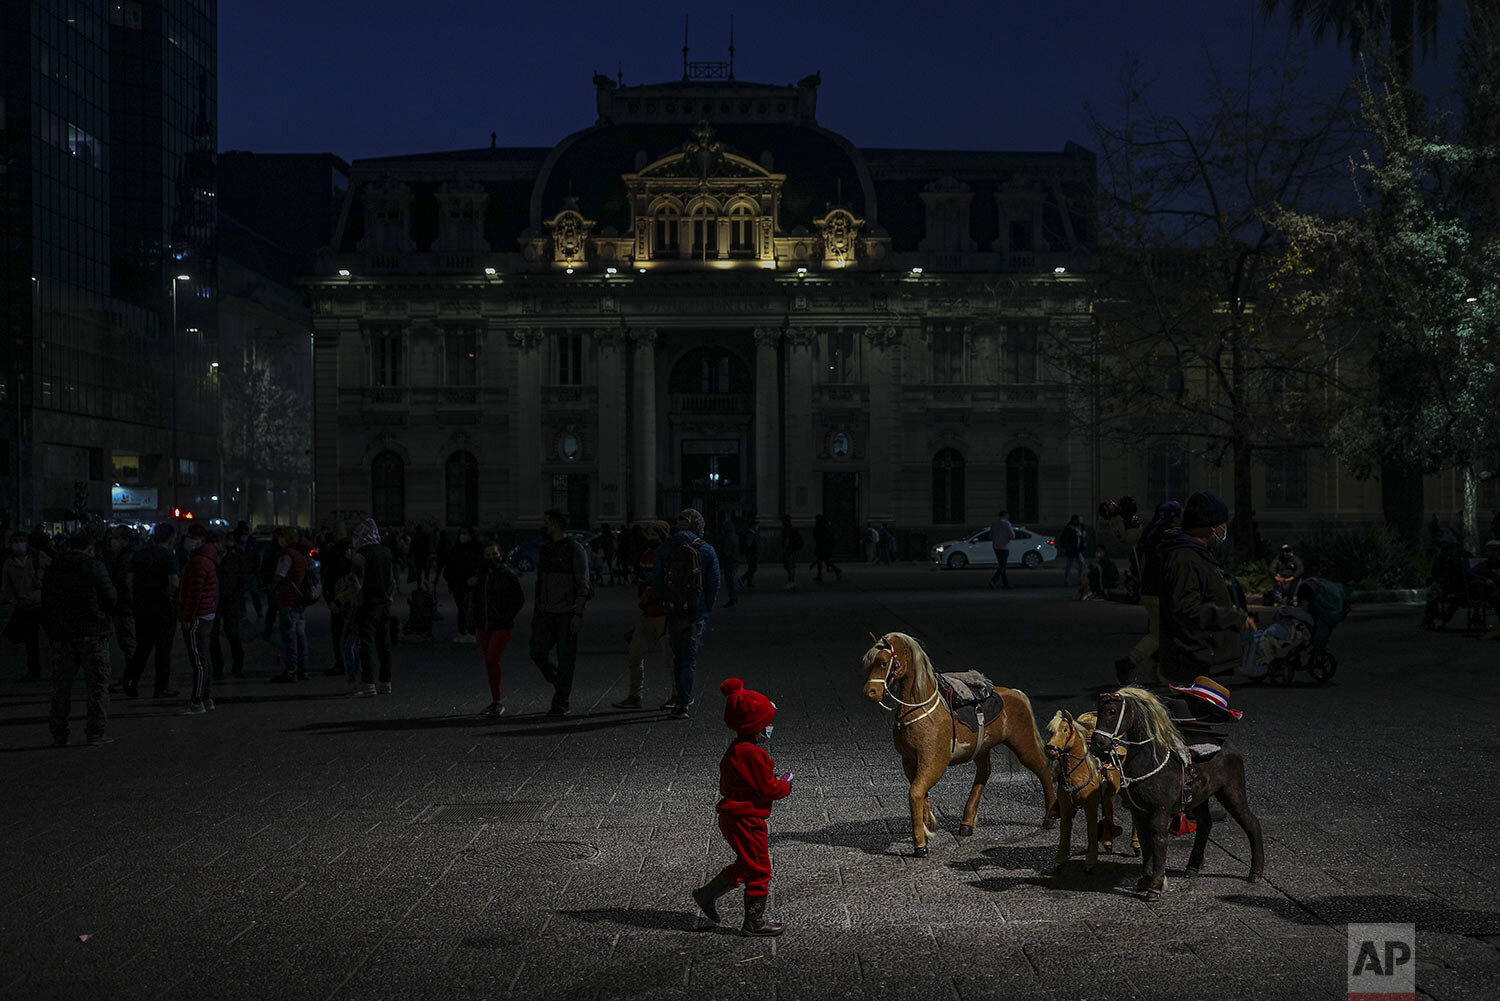  A girl walks near a street photographer’s wooden horses at the Plaza de Armas in downtown Santiago, Chile, Tuesday, July 20, 2021, amid the COVID-19 pandemic. The capital is moving into phase three, ending weekend quarantines and allowing more peopl